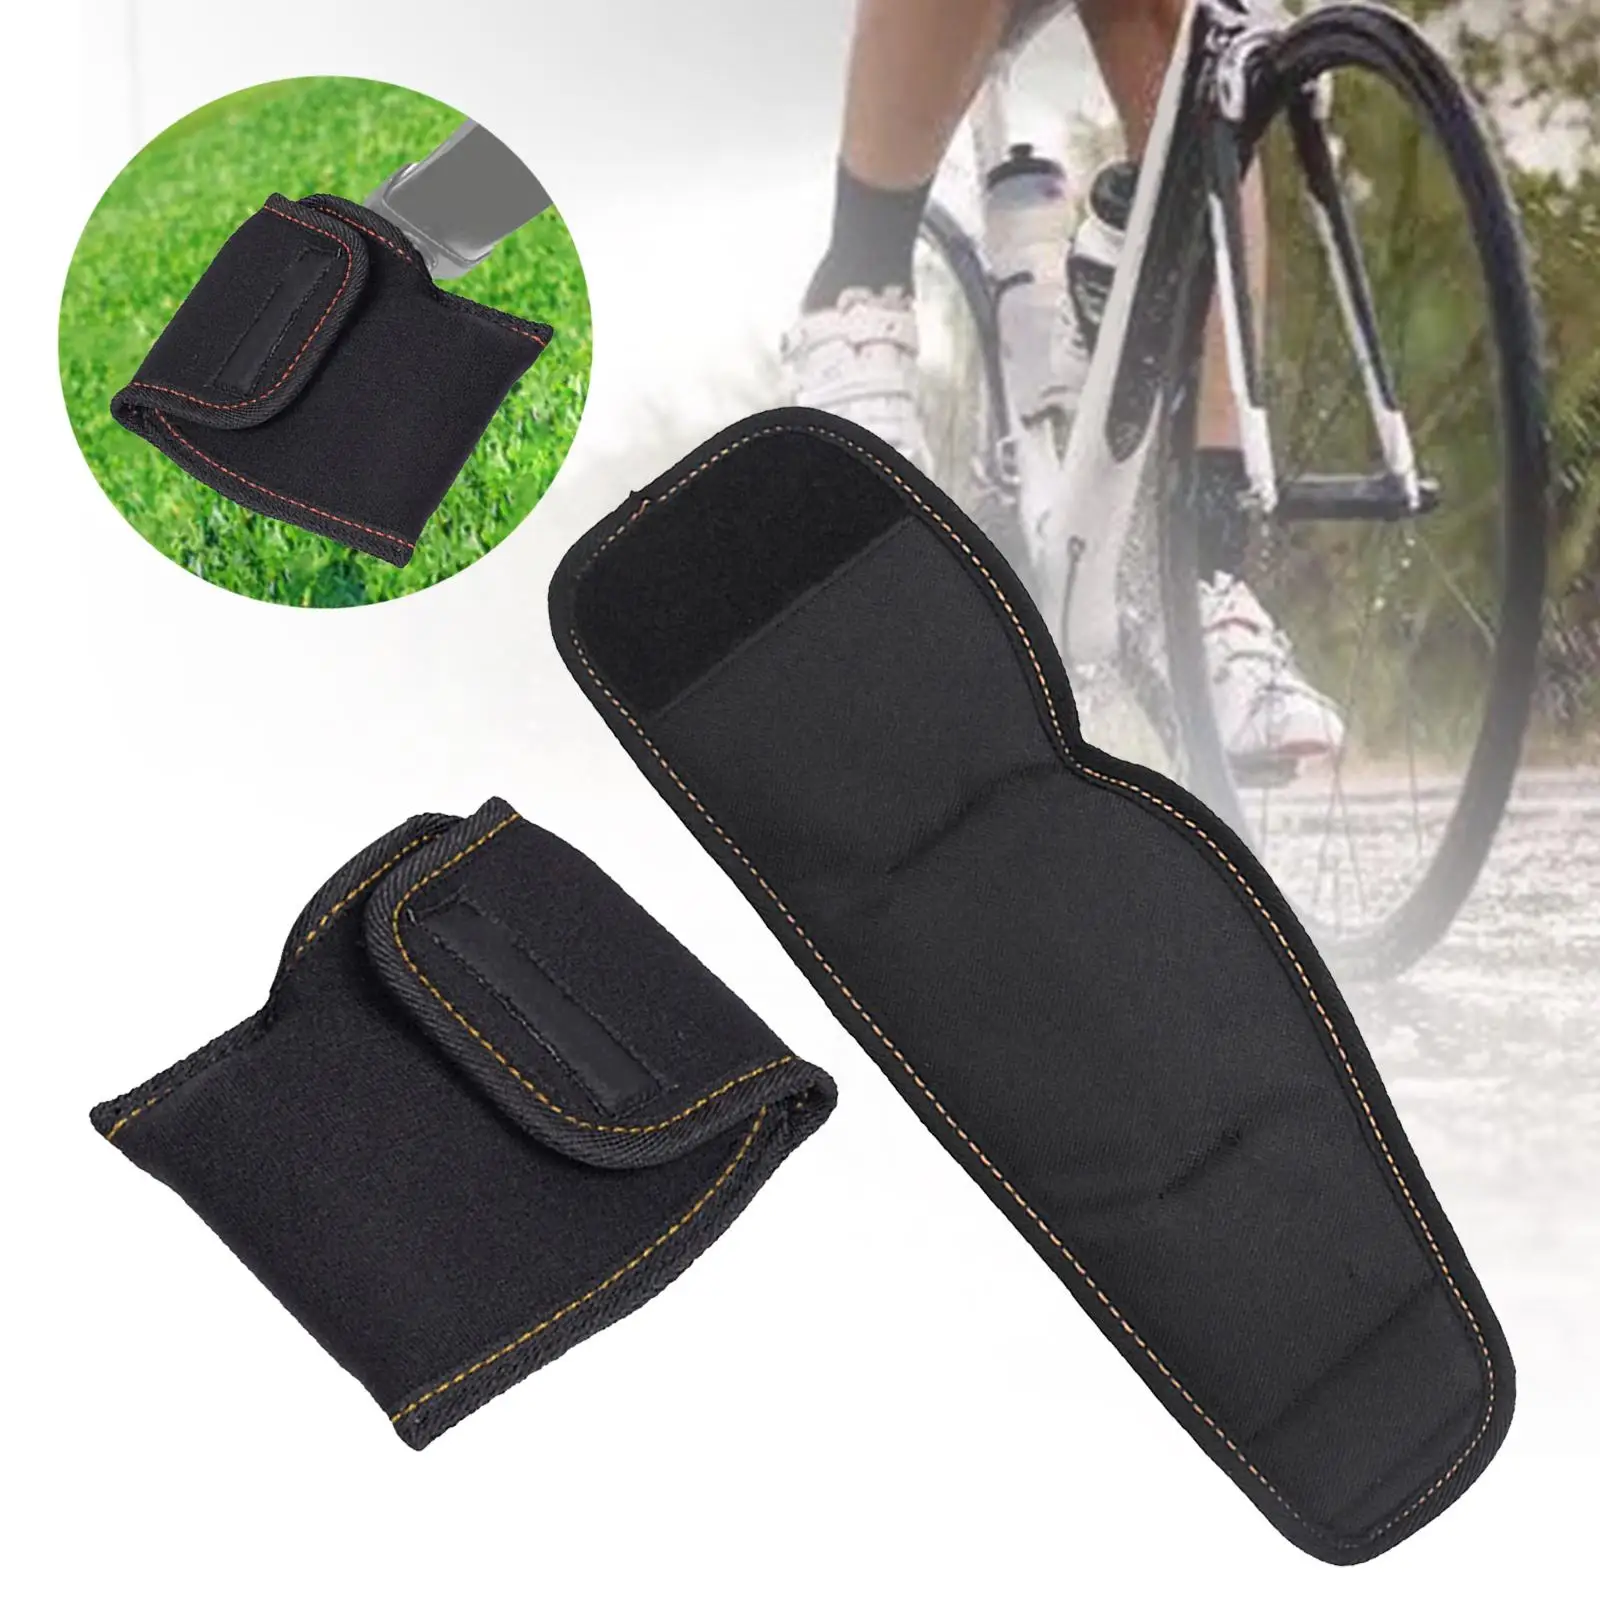 1 Pair Bike Pedal Protective Cover Oxford Cloth Replacement Cleat Sleeves for Mountain Bike